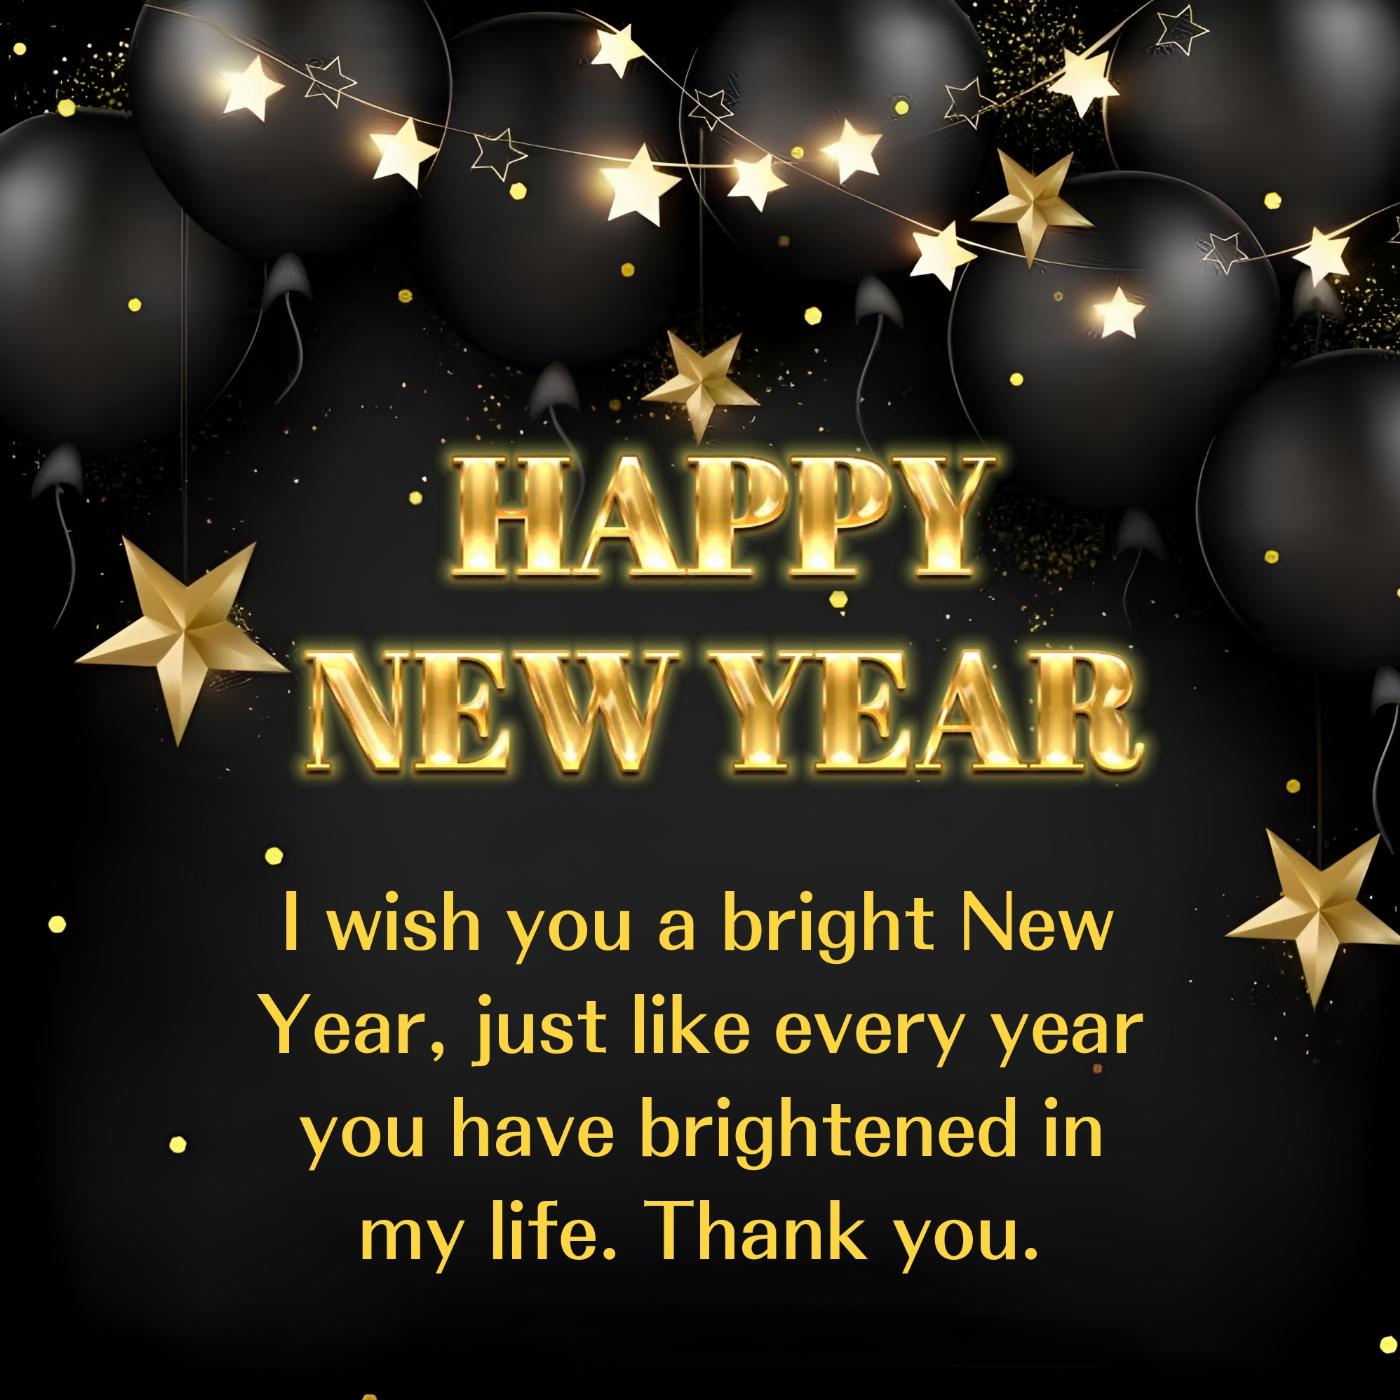 I wish you a bright New Year just like every year